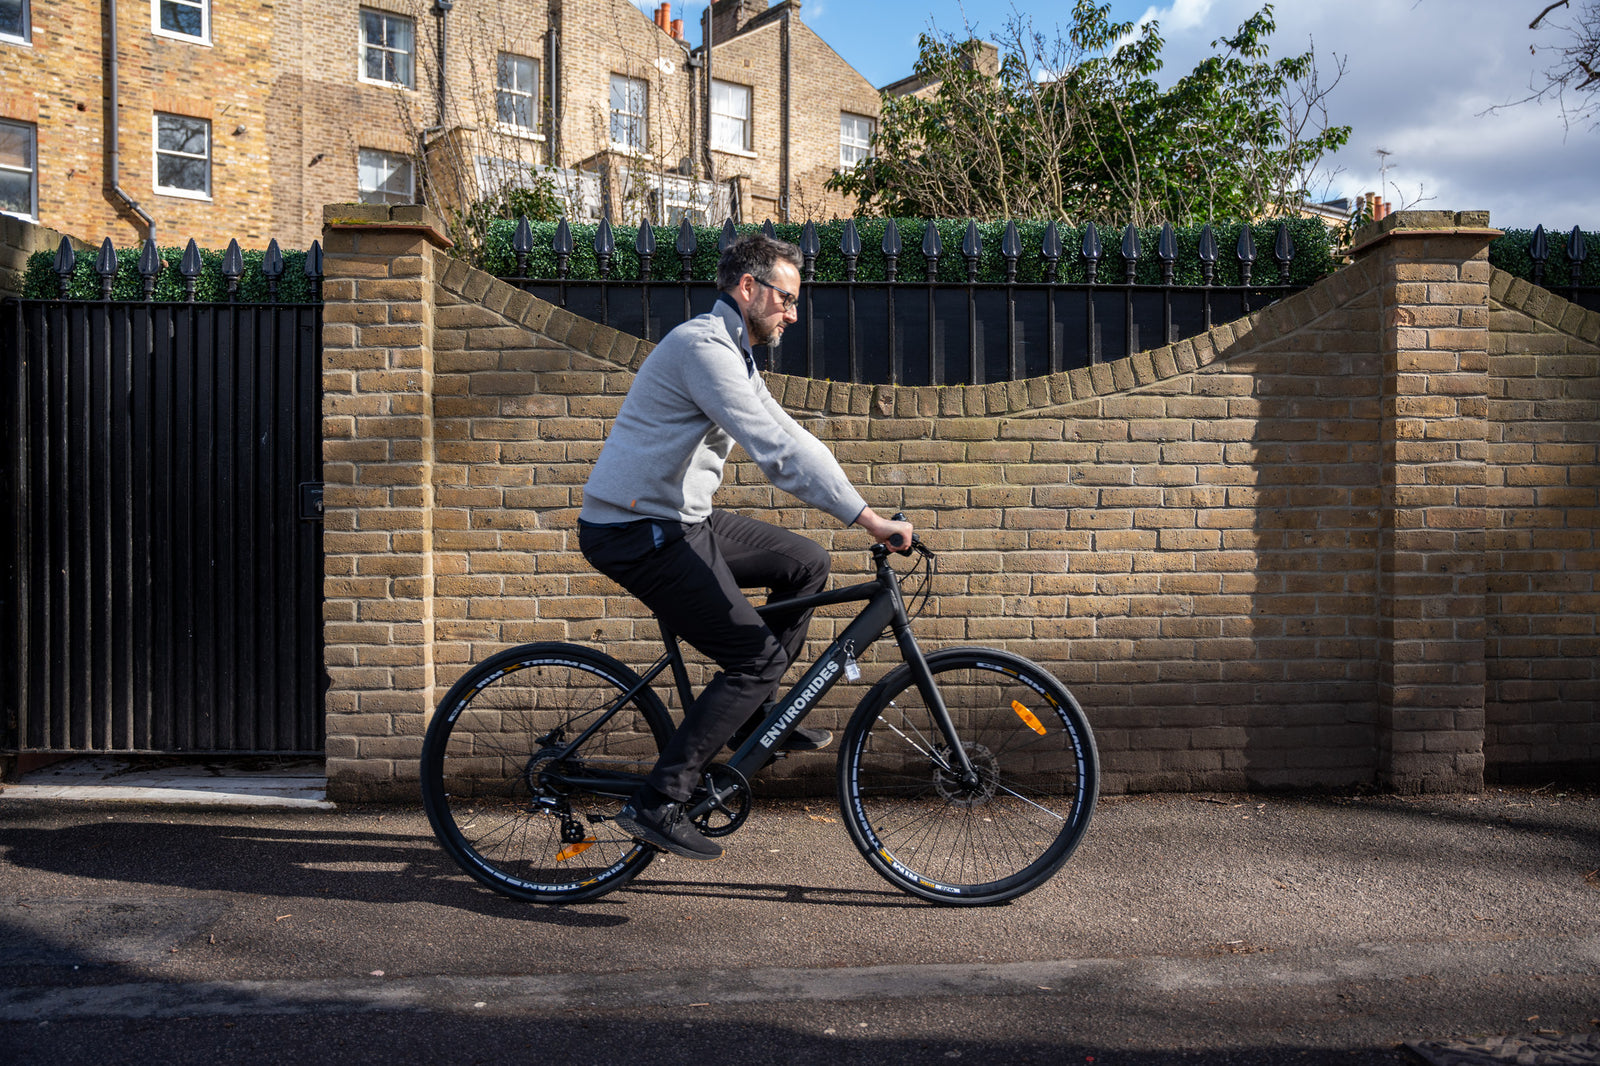 A man riding an eBike on the pavement without a helmet